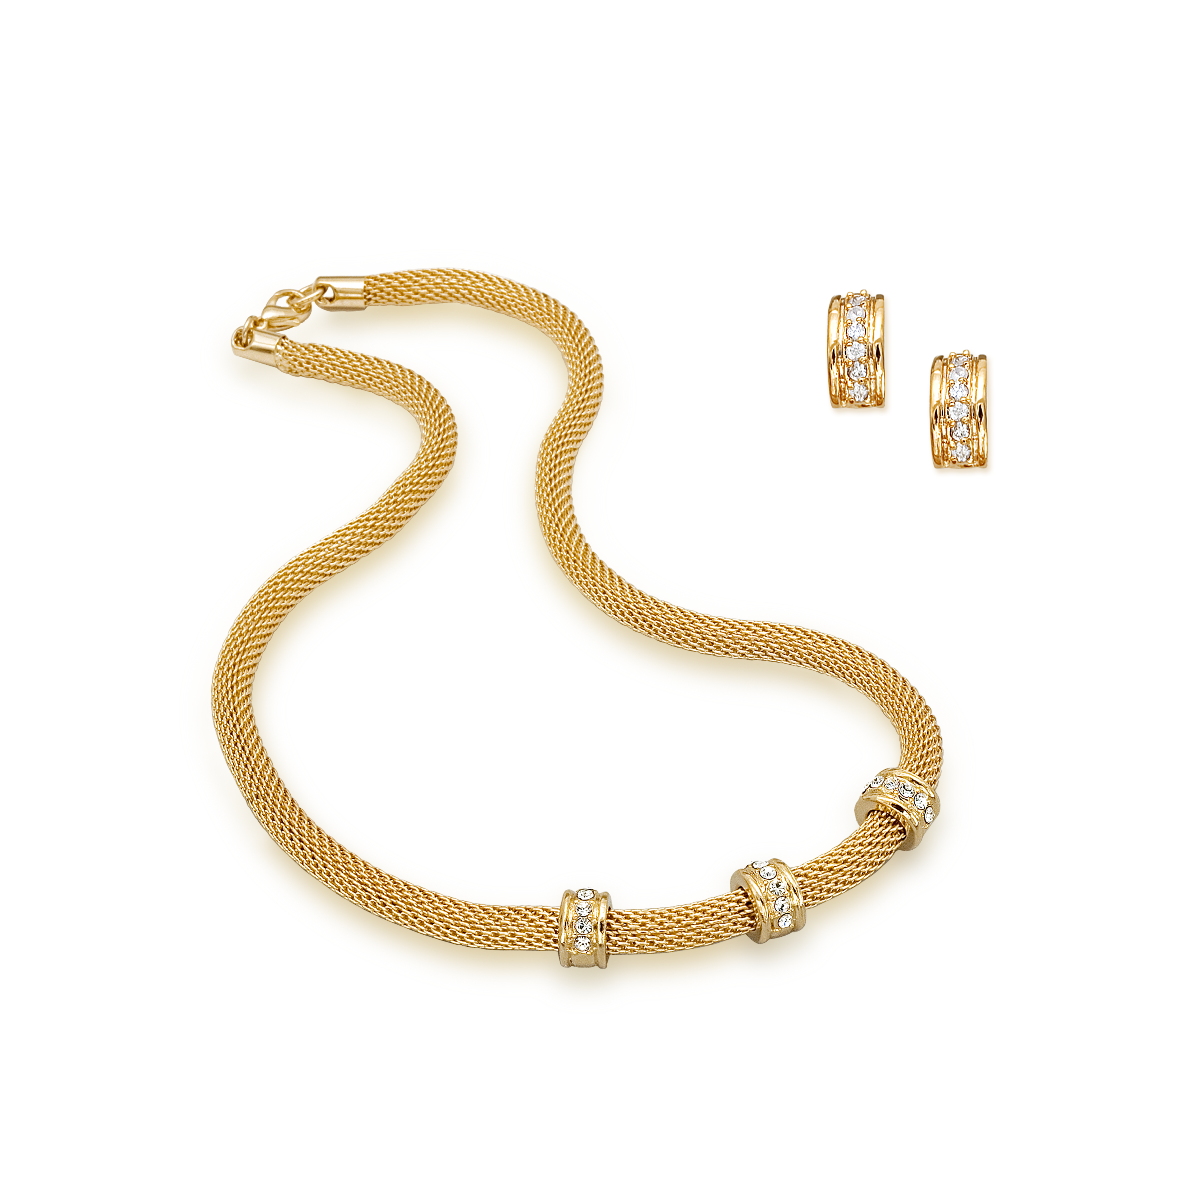 A gold tone mesh necklace with matching earrings.